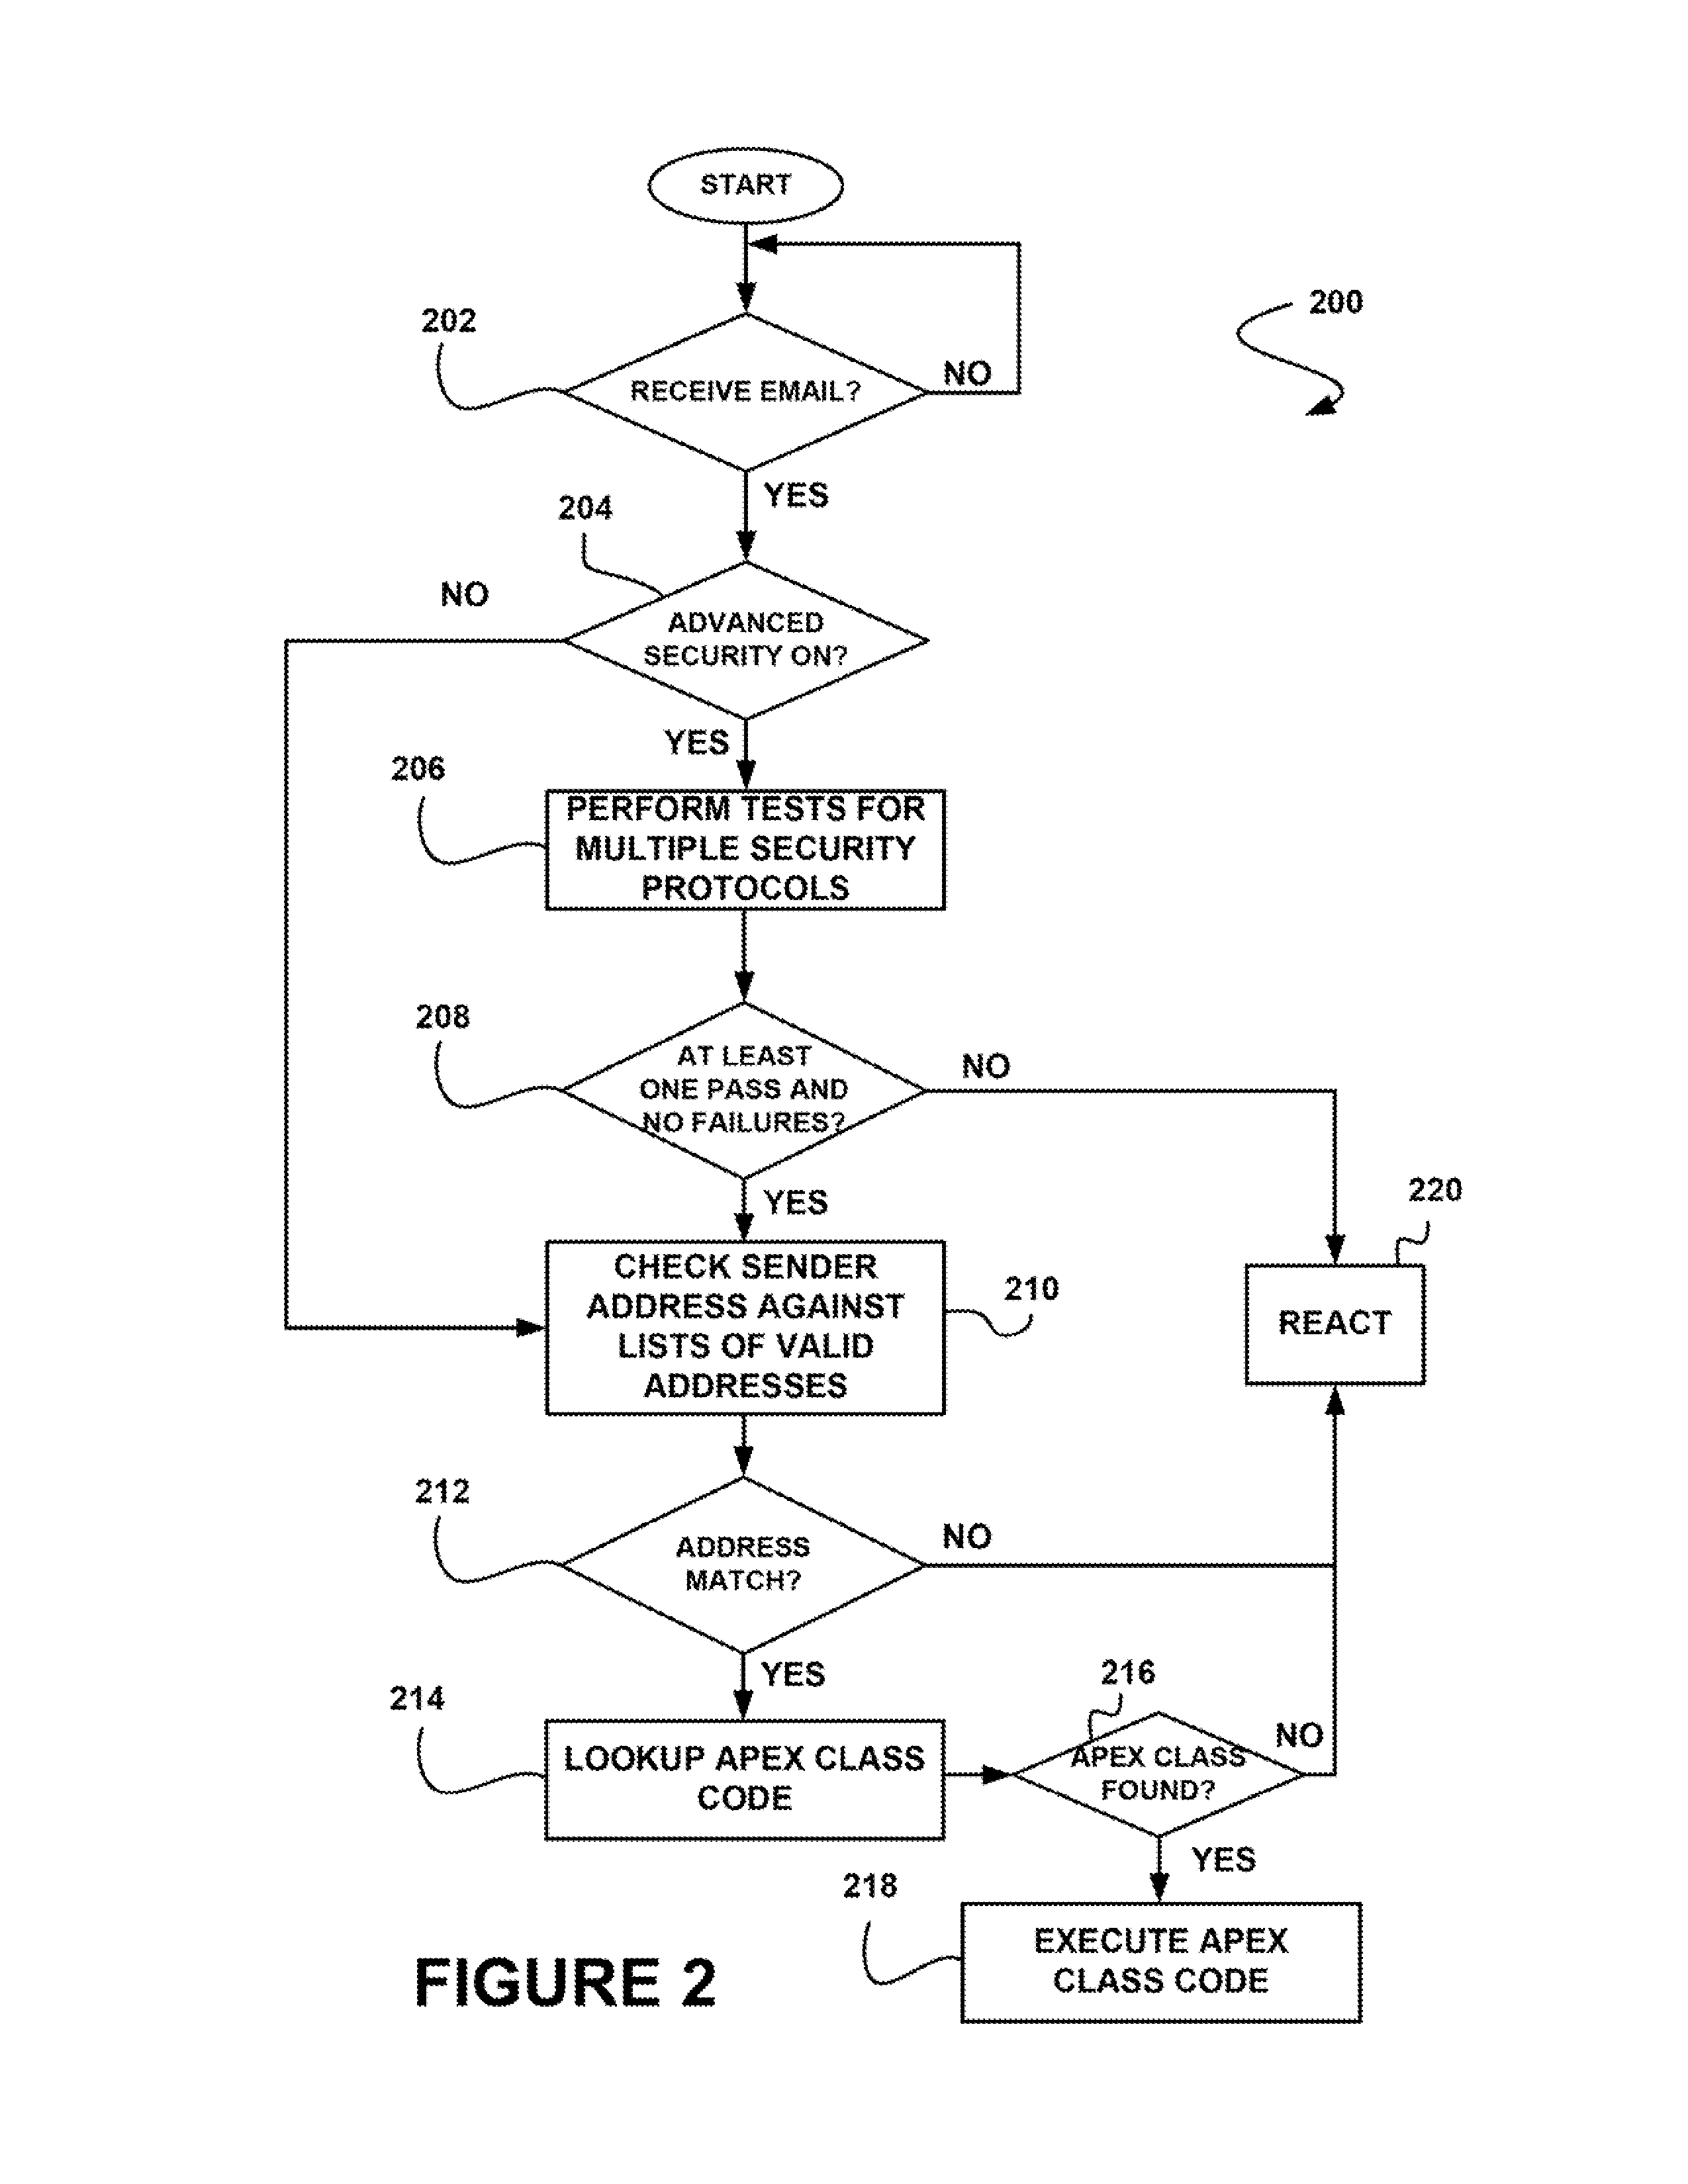 System, method, and computer program product for security verification of communications to tenants of an on-demand database service